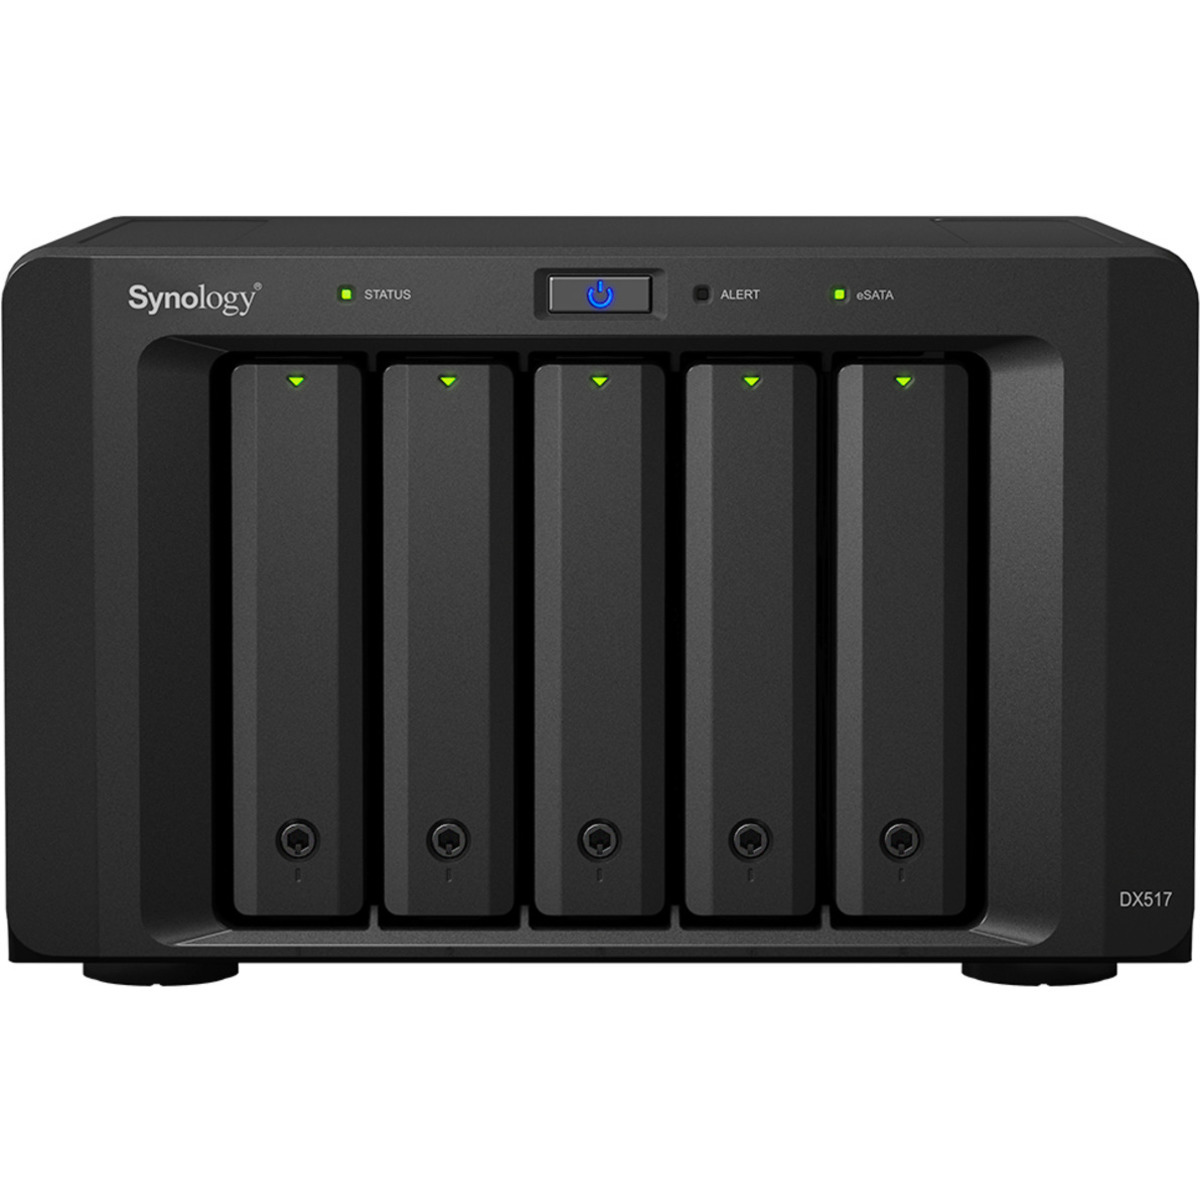 Synology DX517 External Expansion Drive 18tb 5-Bay Desktop Multimedia / Power User / Business Expansion Enclosure 3x6tb Seagate IronWolf Pro ST6000NT001 3.5 7200rpm SATA 6Gb/s HDD NAS Class Drives Installed - Burn-In Tested DX517 External Expansion Drive